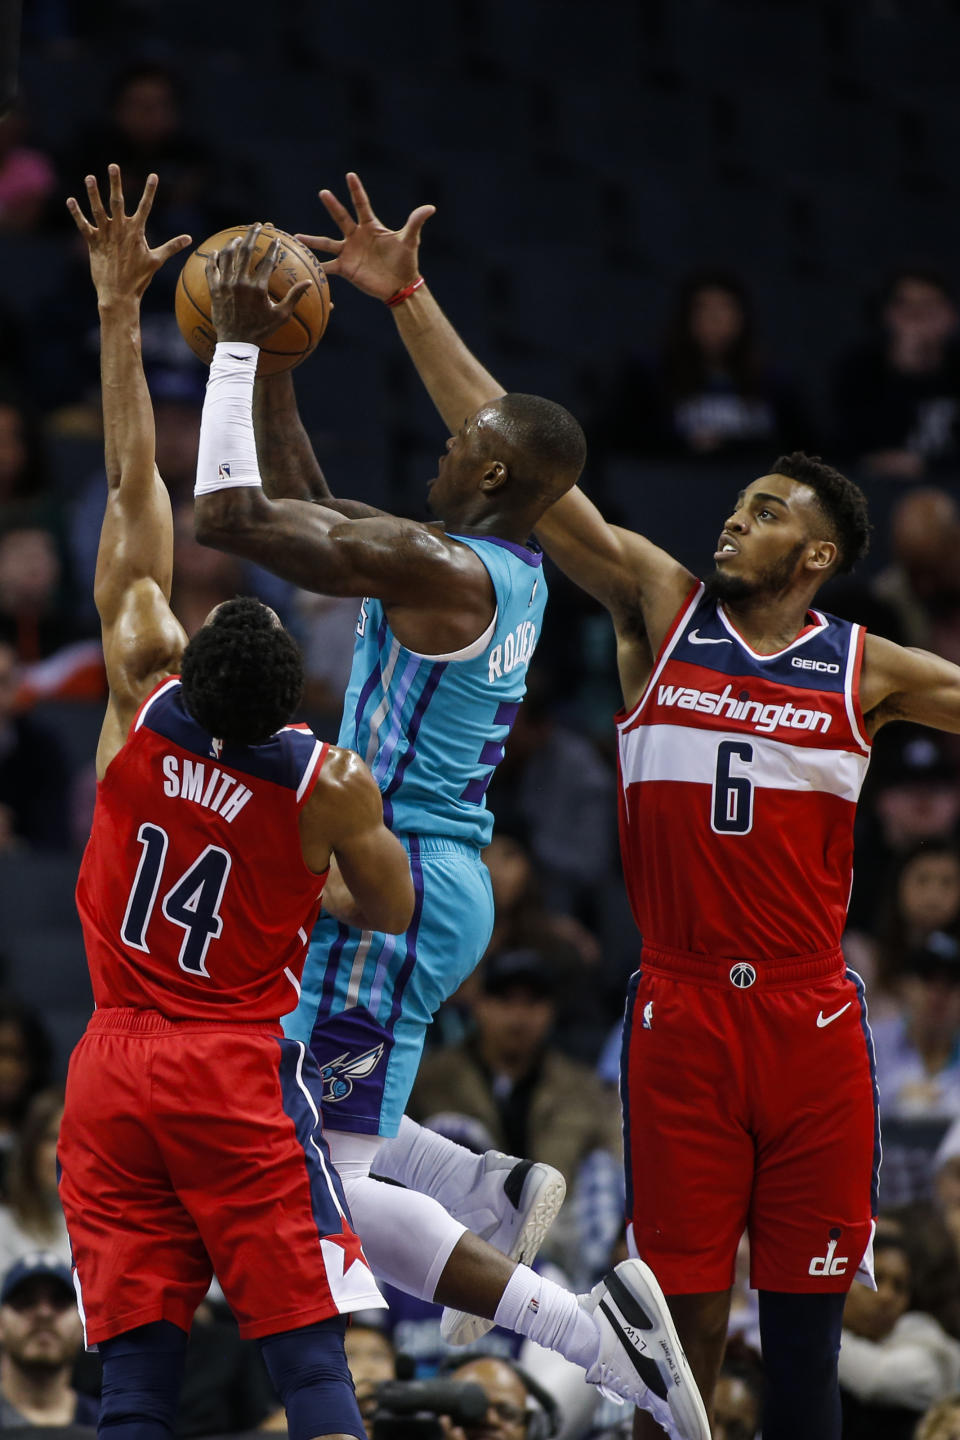 Charlotte Hornets guard Terry Rozier, center, shoots between Washington Wizards guards Ish Smith (14) and Troy Brown Jr. (6) in the first half of an NBA basketball game in Charlotte, N.C., Tuesday, Dec. 10, 2019. (AP Photo/Nell Redmond)